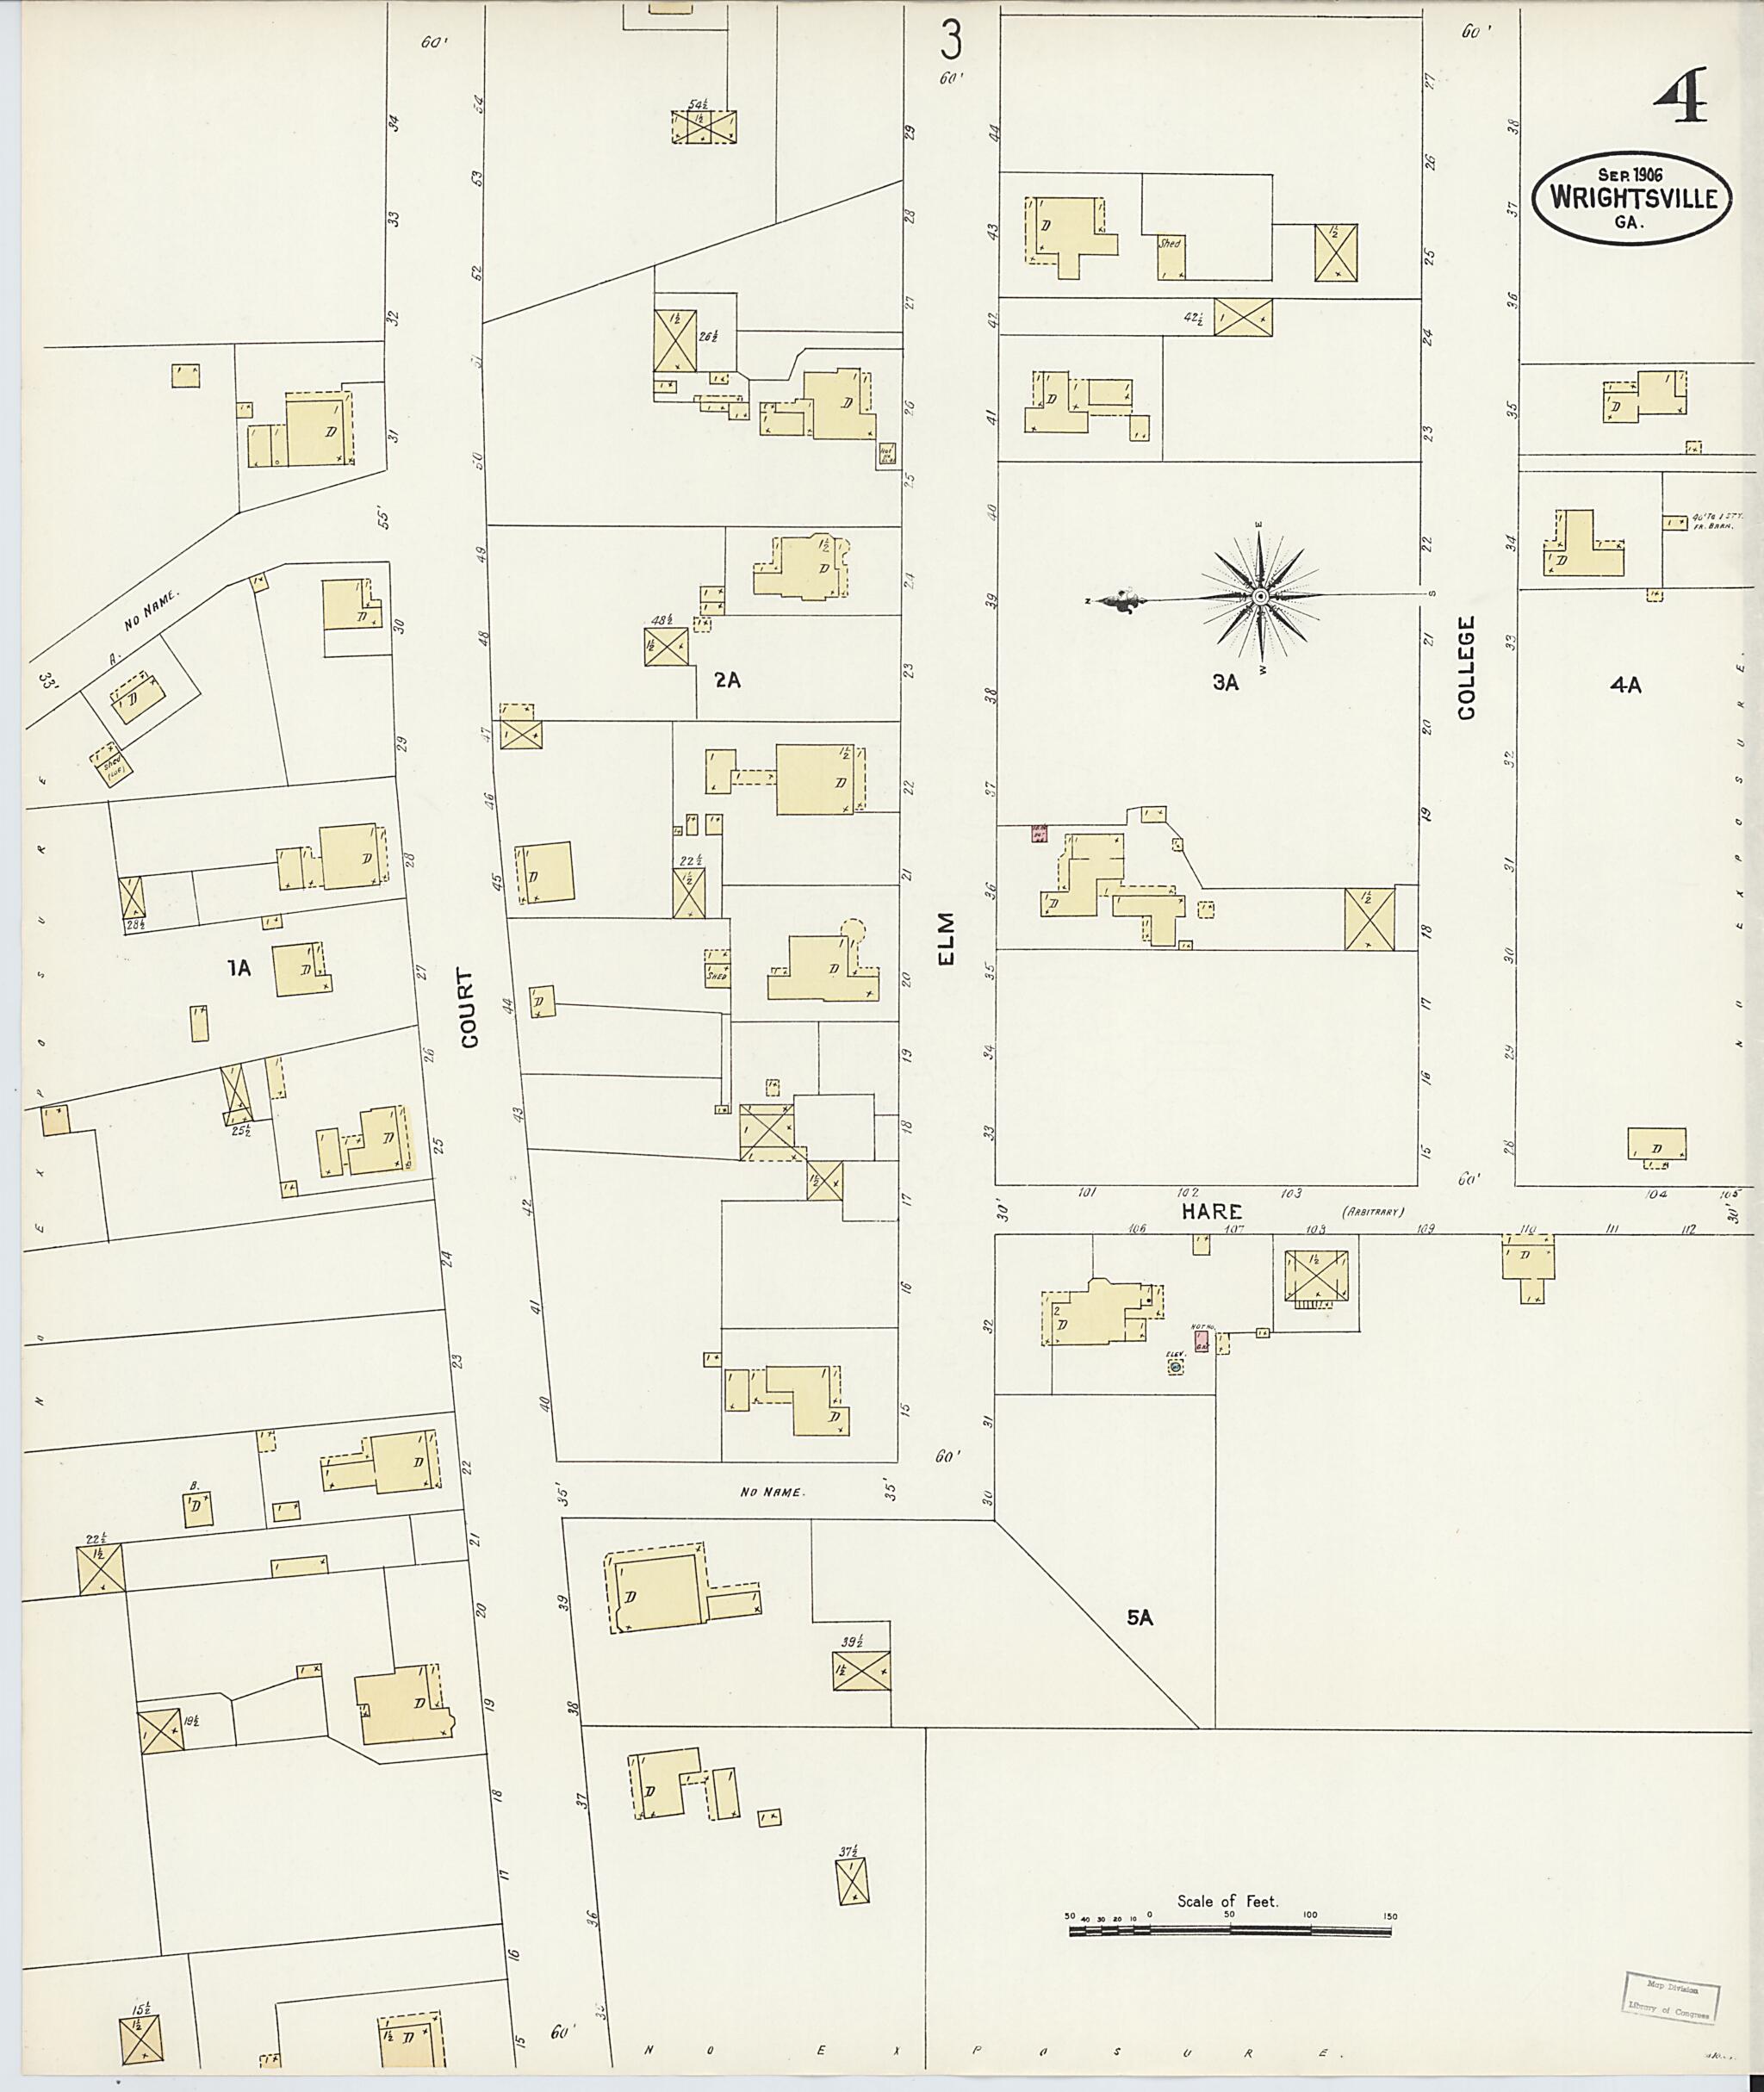 This old map of Wrightsville, Johnson County, Georgia was created by Sanborn Map Company in 1906